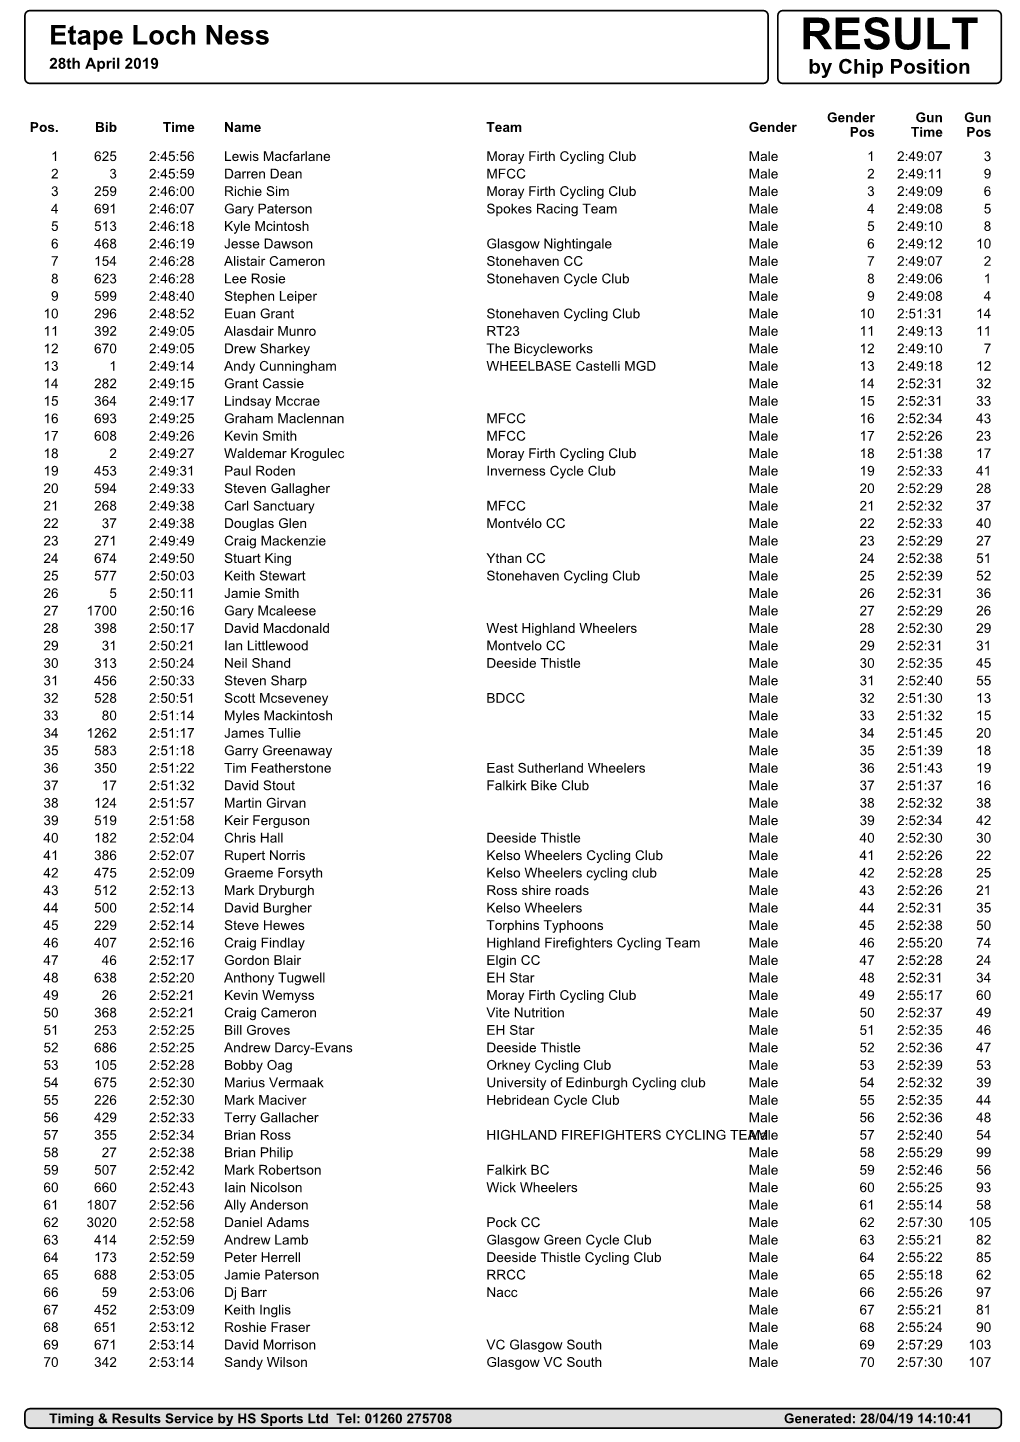 Etape Loch Ness RESULT 28Th April 2019 by Chip Position